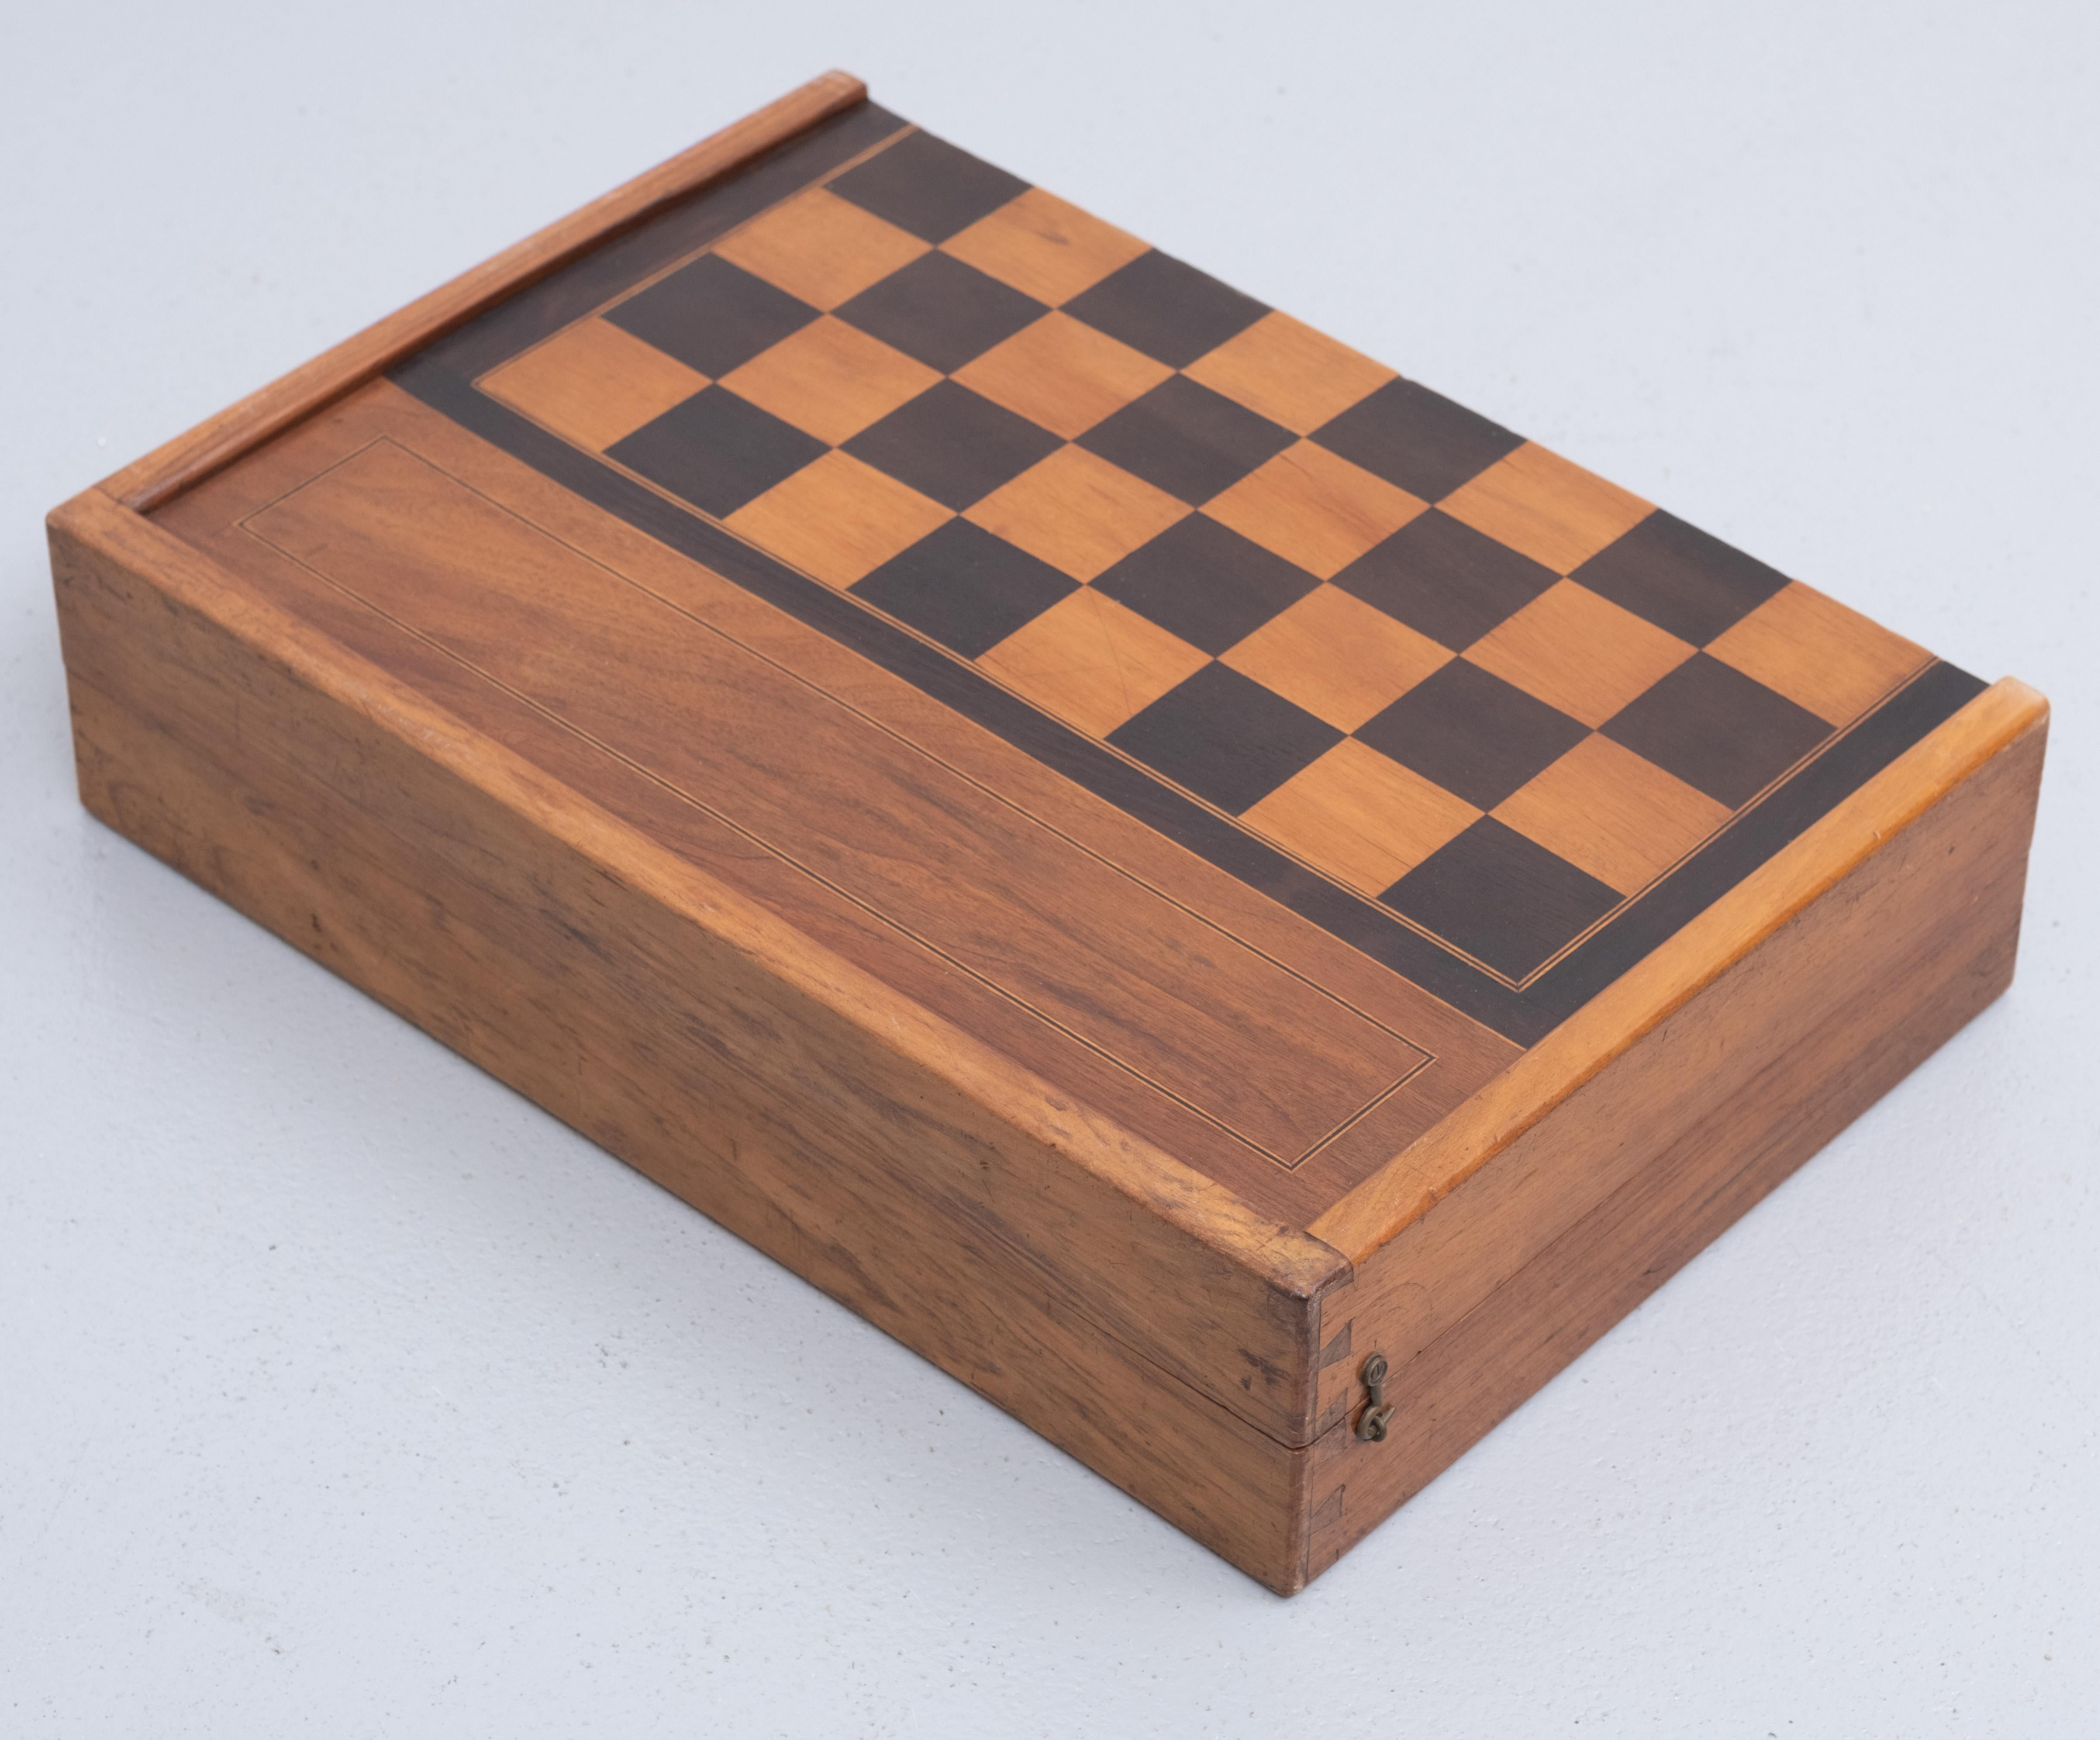 Teak Antique English Folding Chess / Games Box with 5 Games